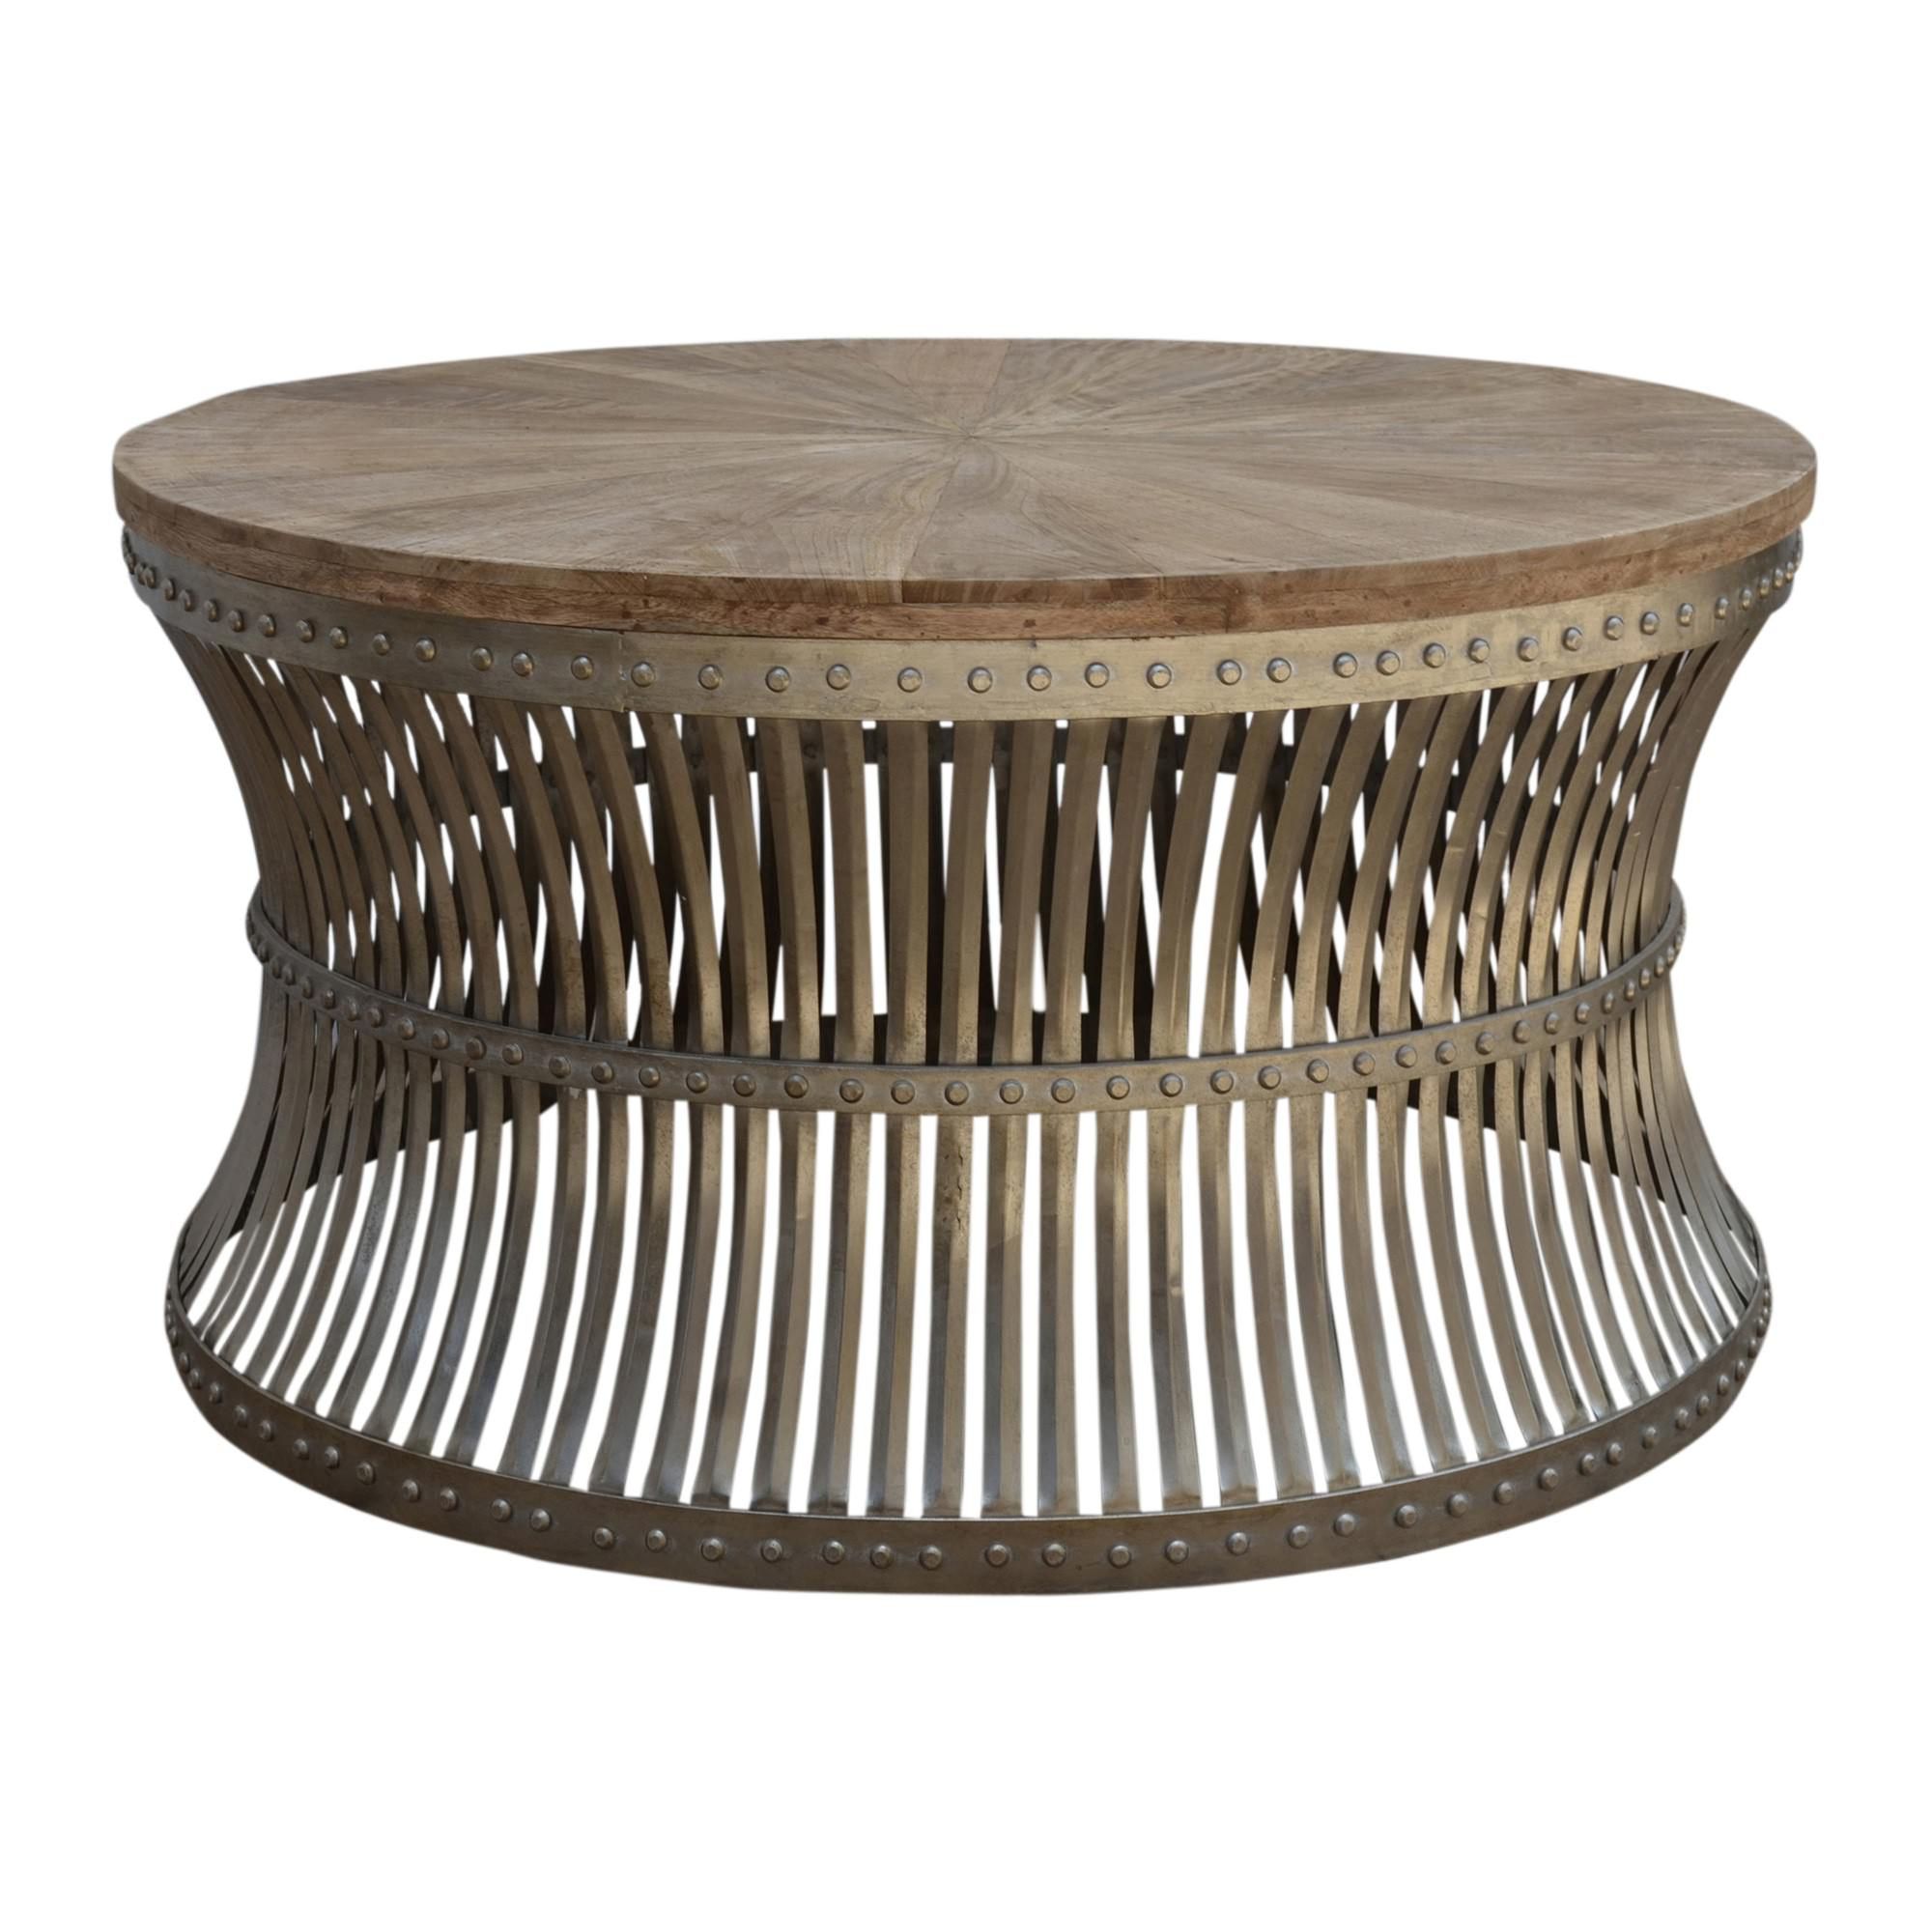 Widely Used Hullbridge Mango Wood Topped Iron Round Coffee Table, 90cm Within Round Iron Coffee Tables (View 4 of 10)